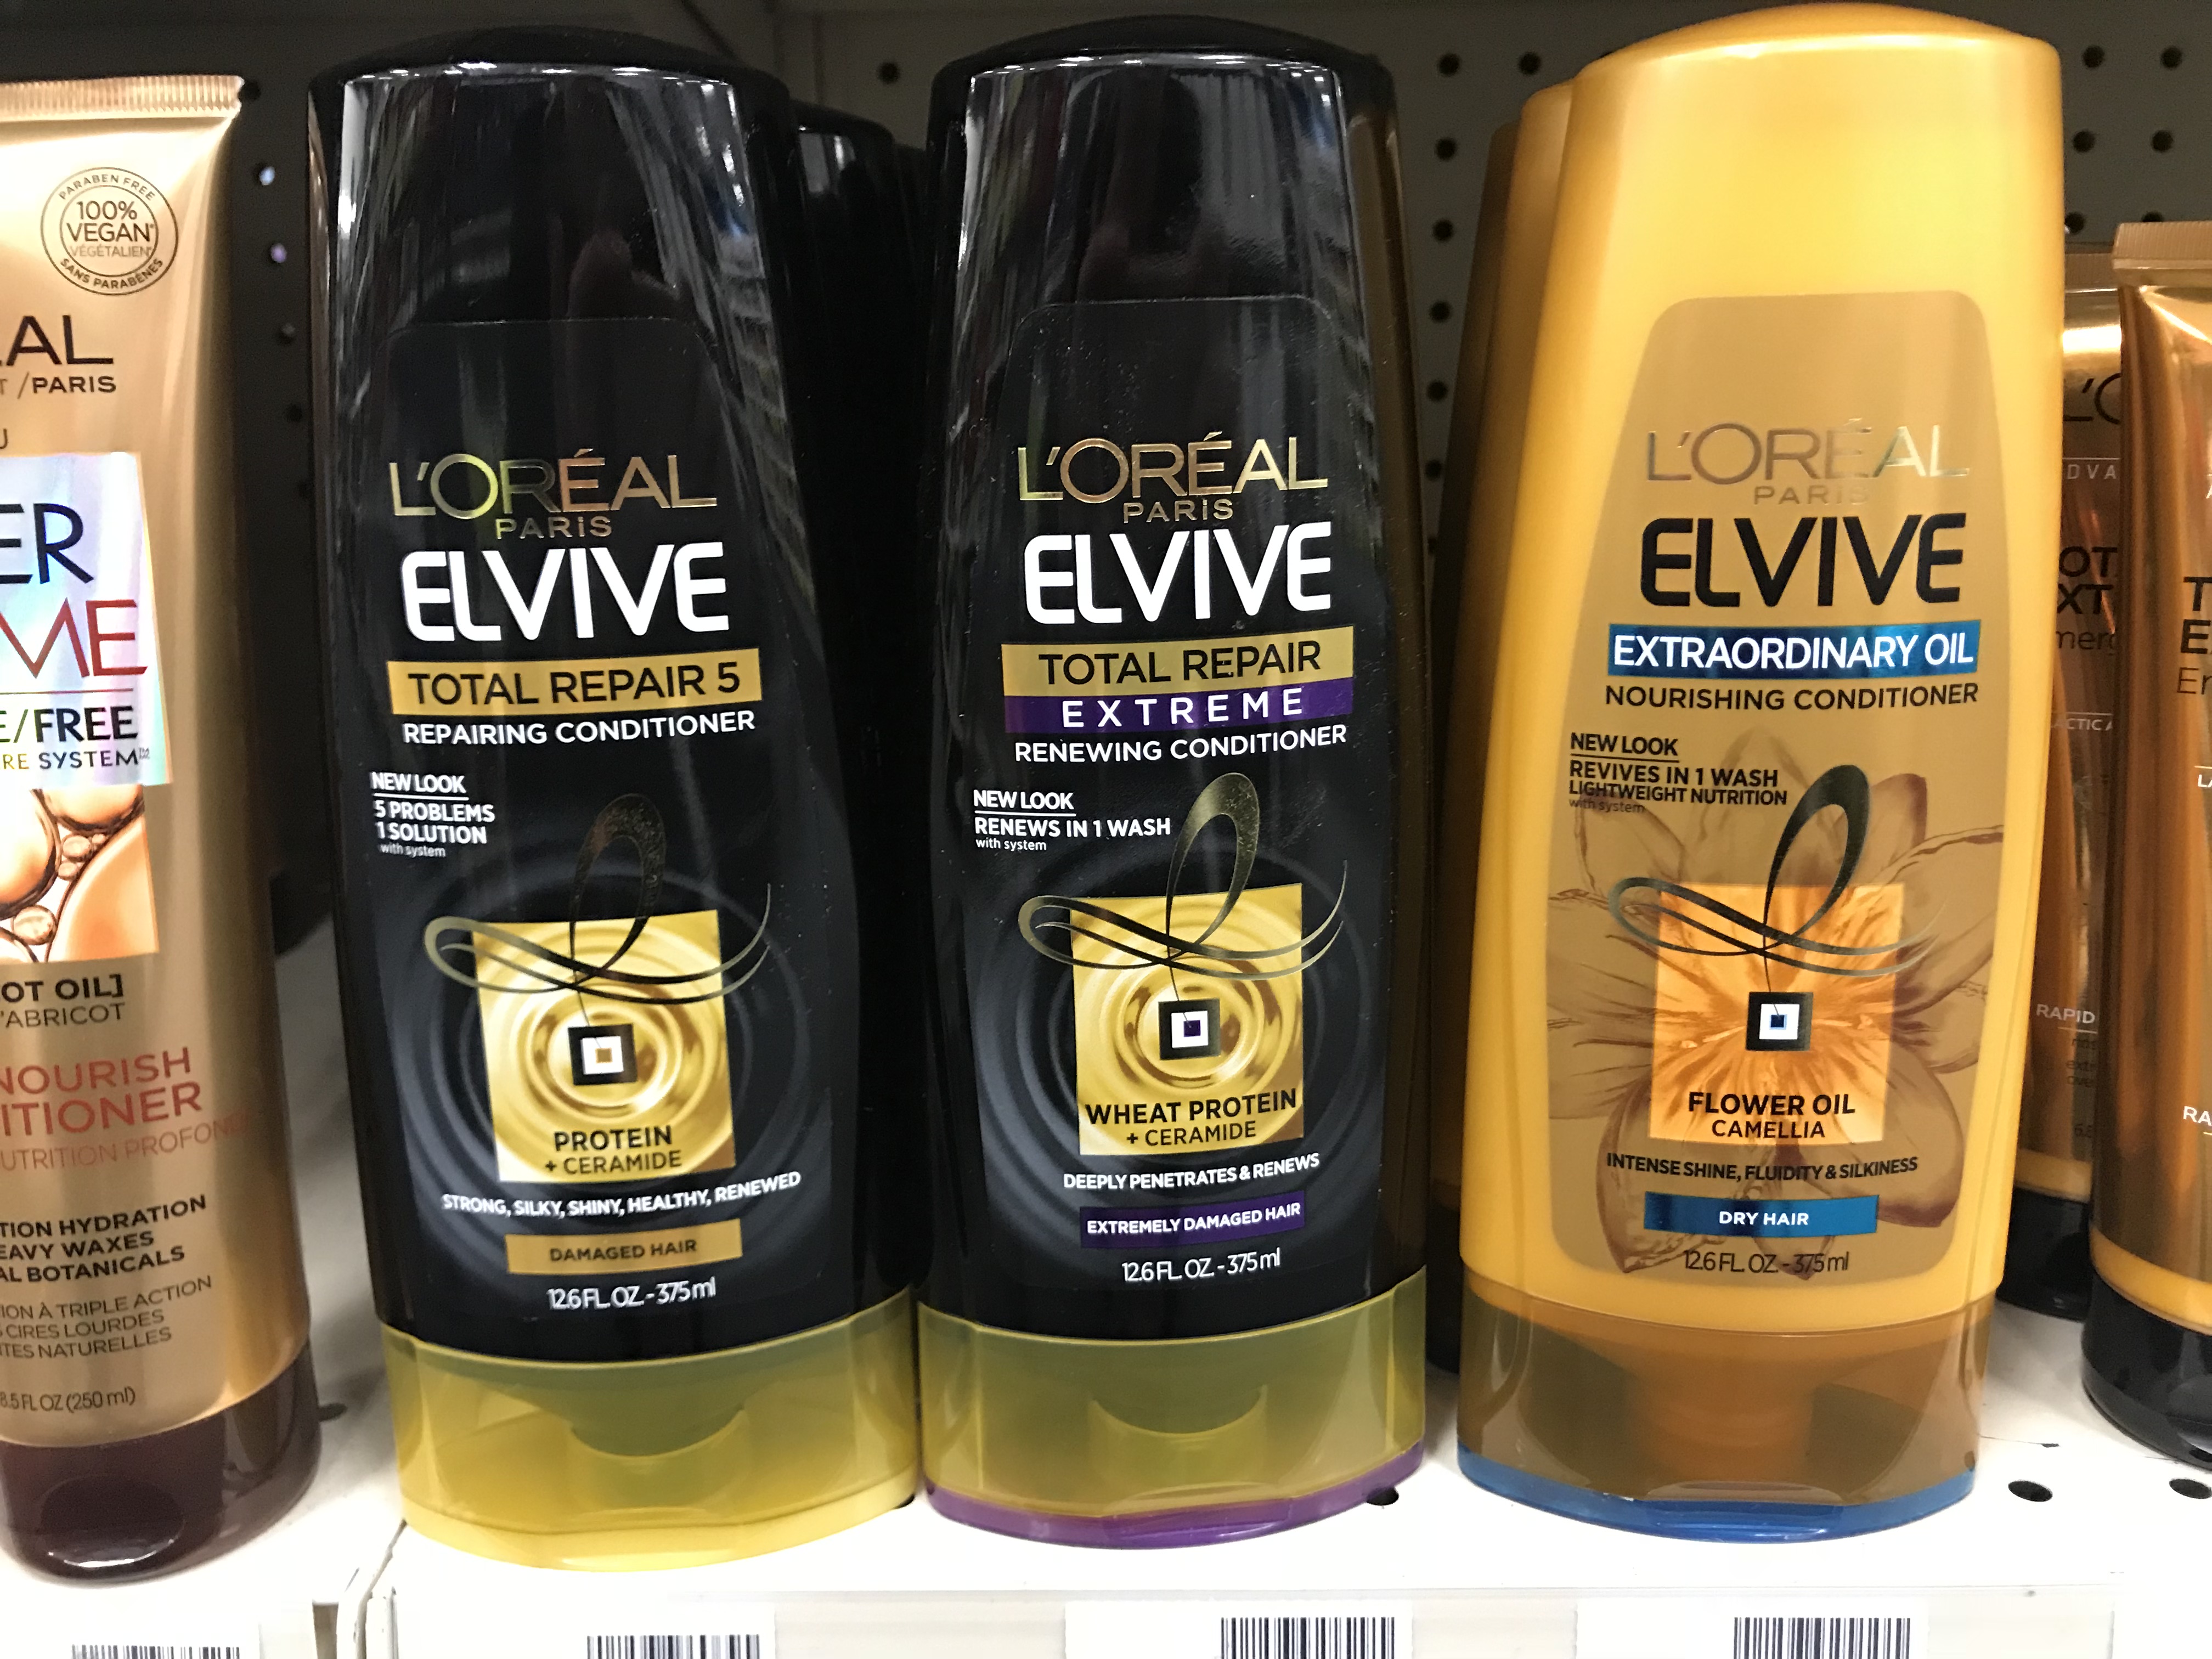 High Value 3/2 L’Oreal Elvive Haircare Coupon = Only 1 After CVS Rewards